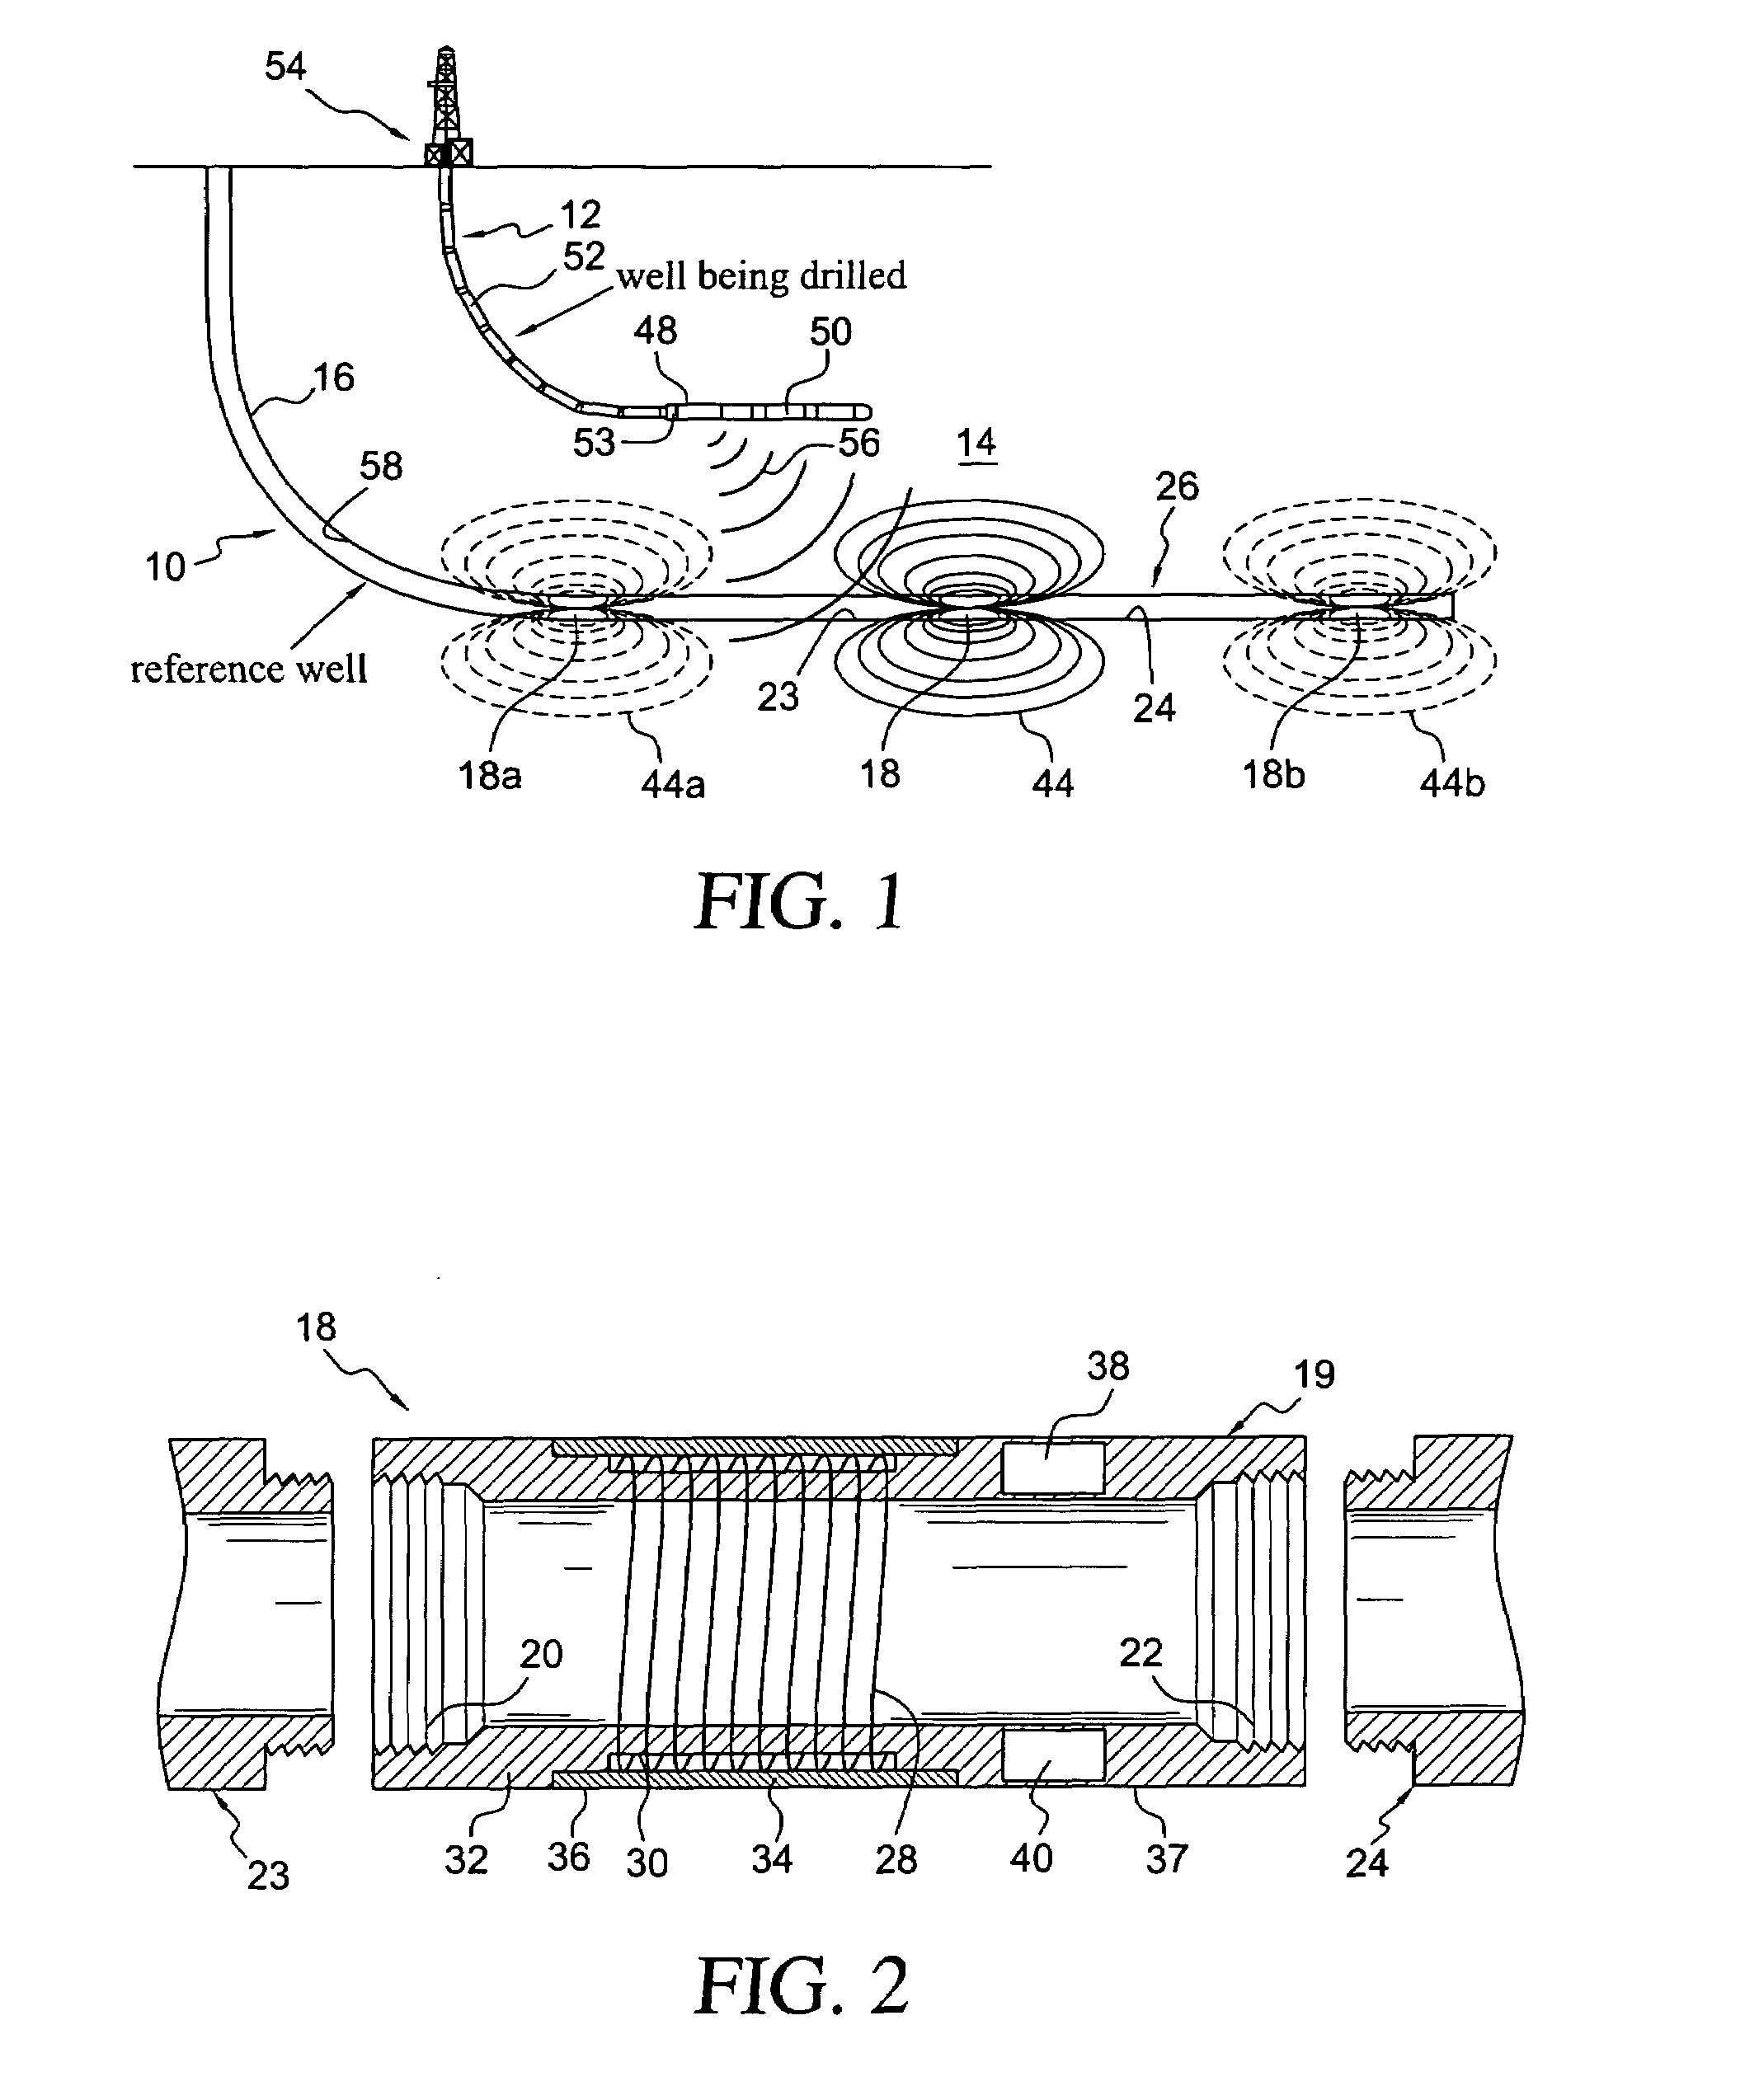 Electromagnetically determining the relative location of a drill bit using a solenoid source installed on a steel casing